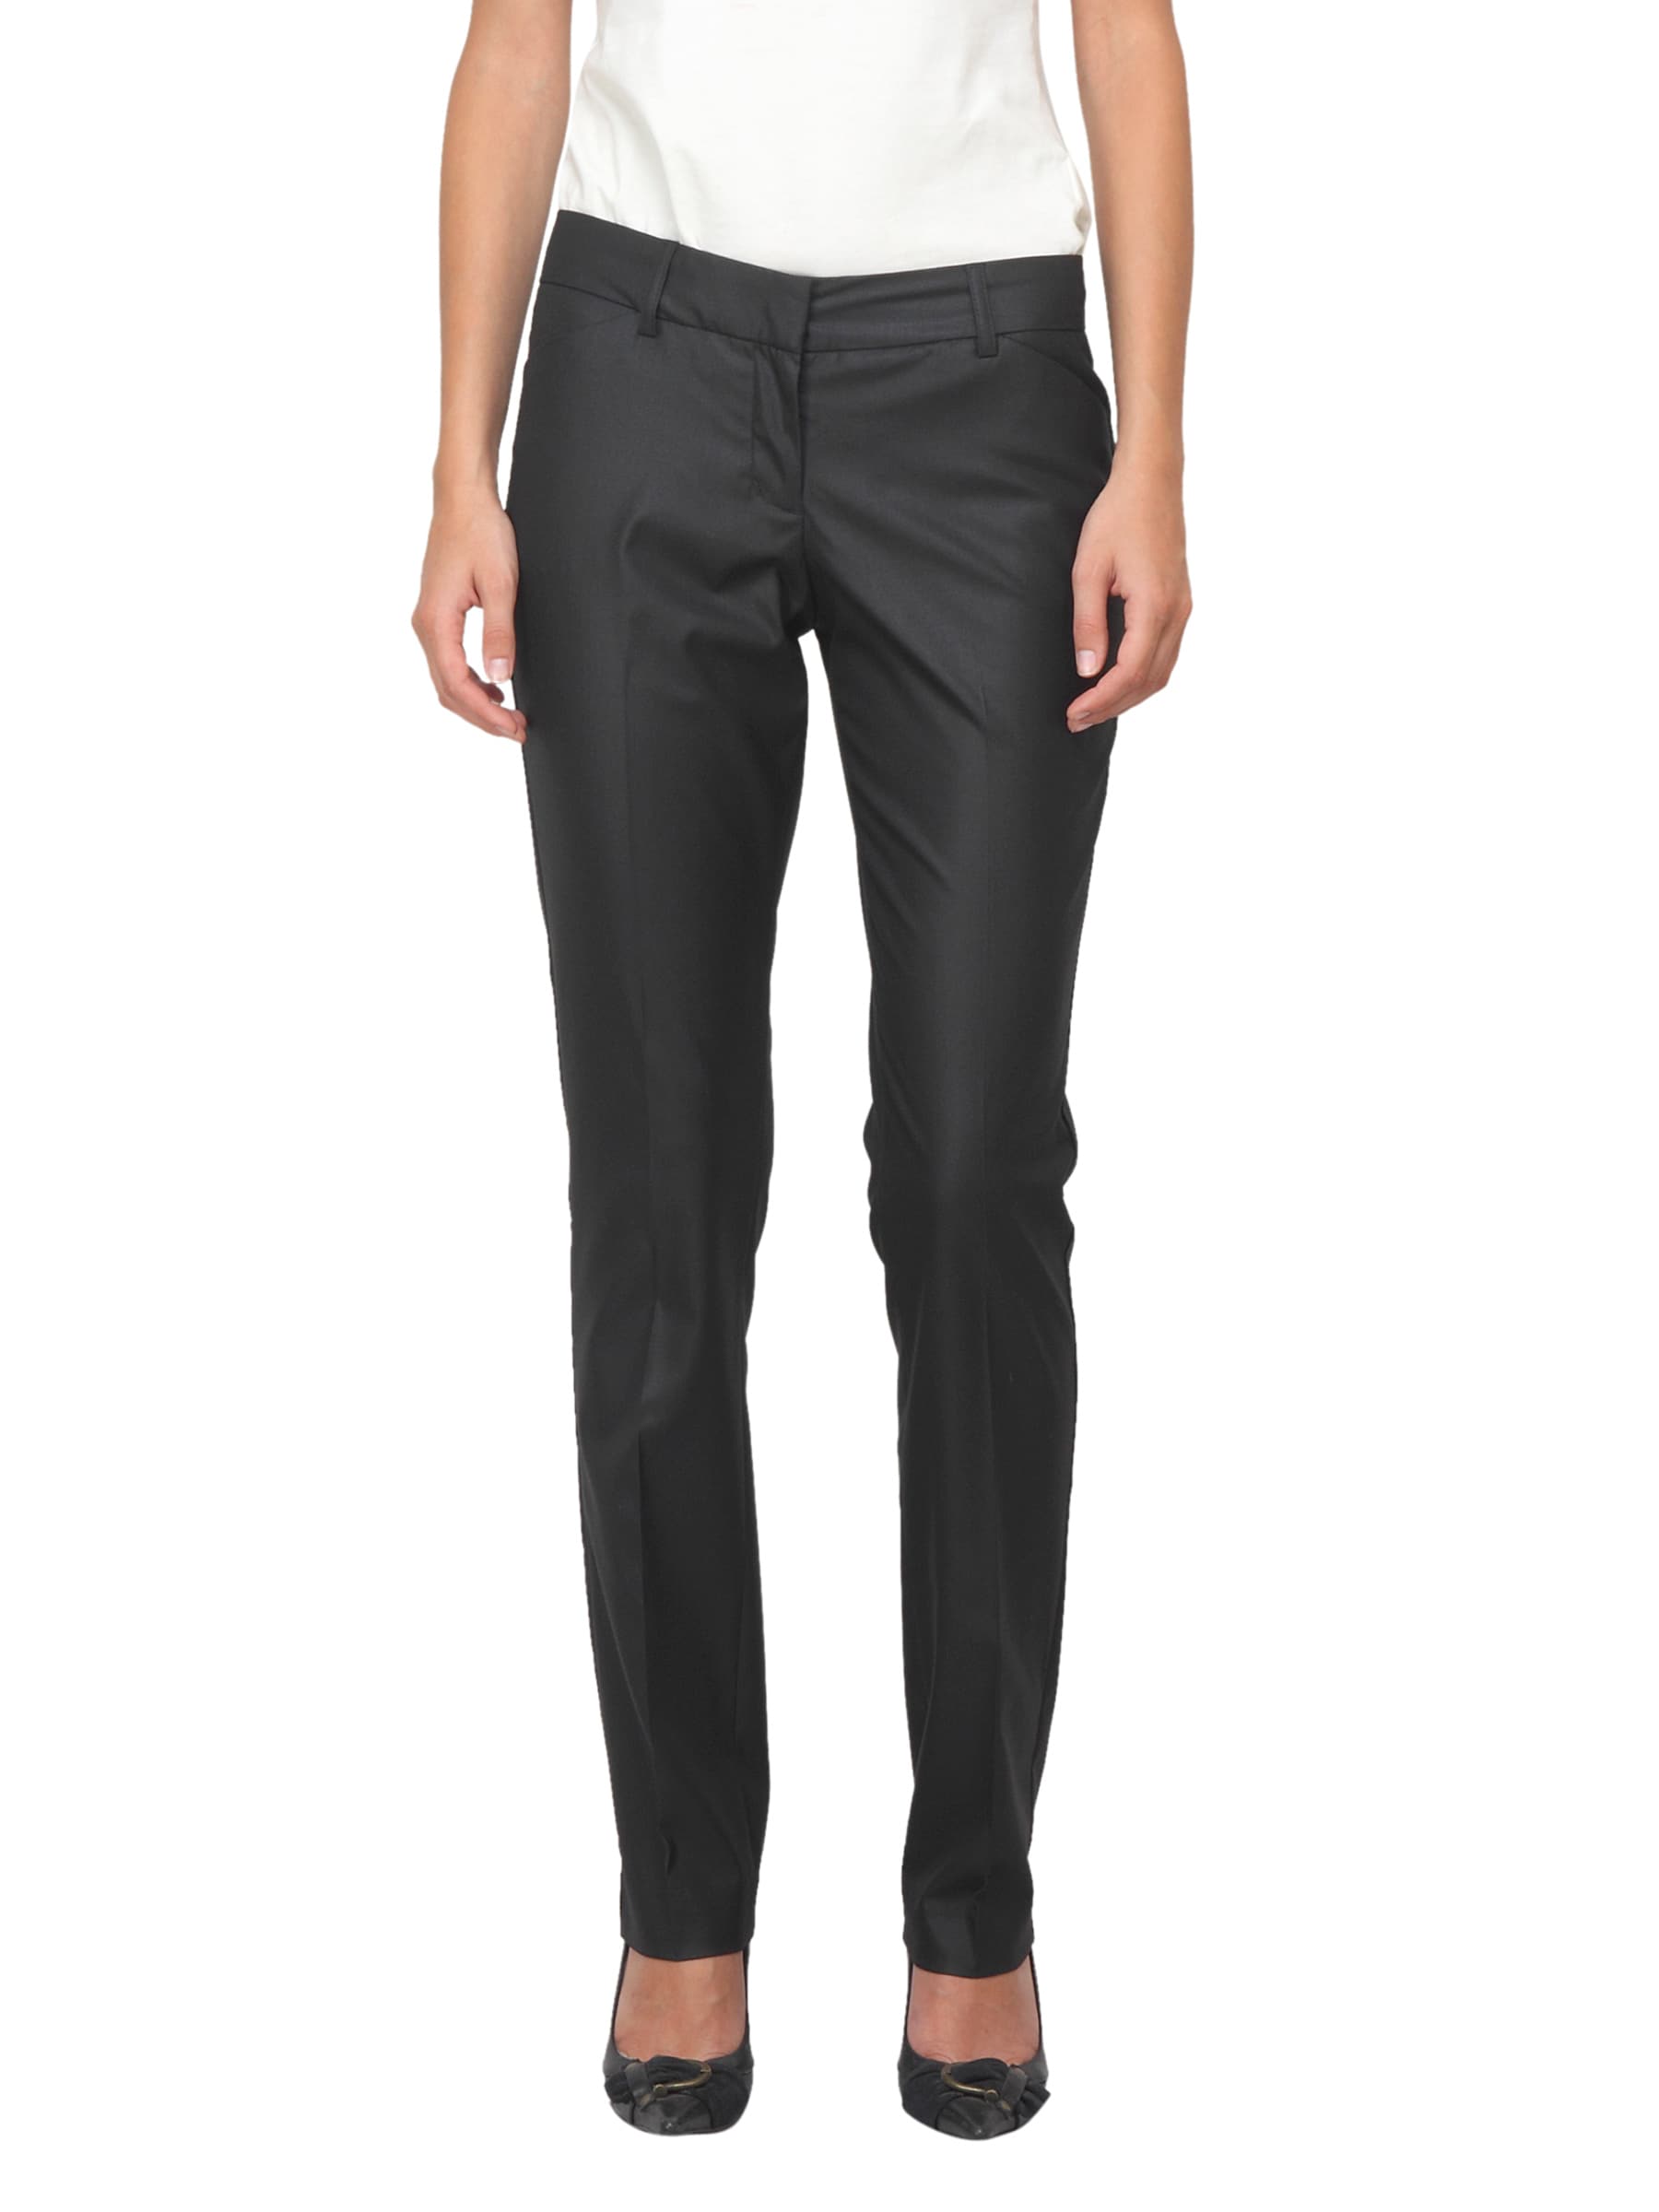 Scullers For Her Black Trousers